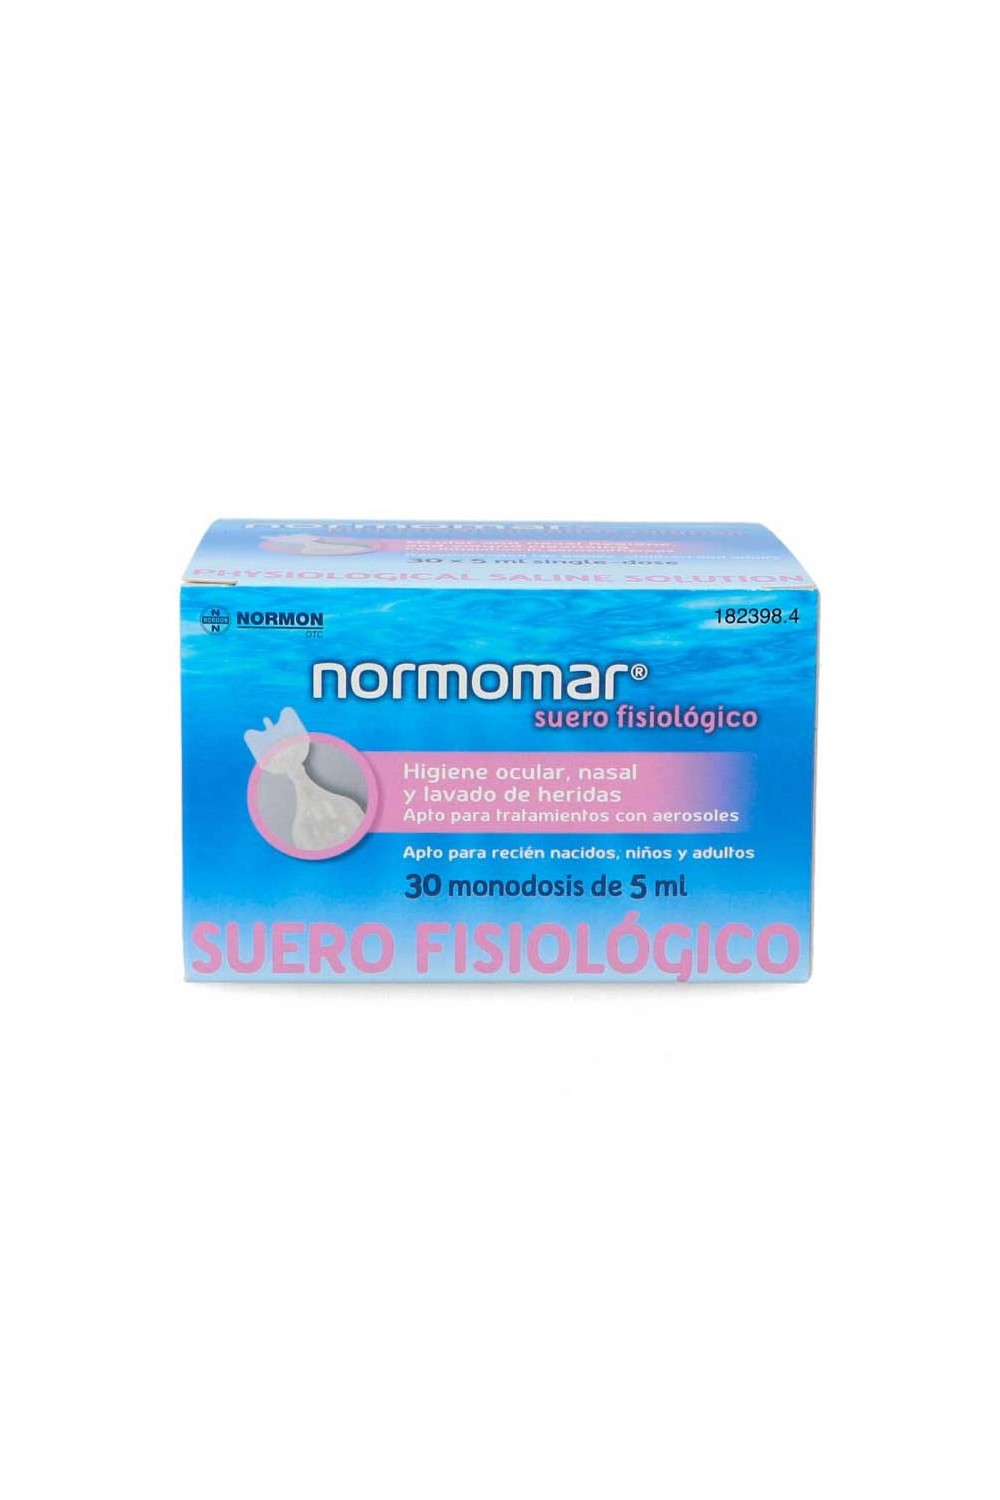 NORMON - Normomar Baby Physiological Serum 30 Ampoules